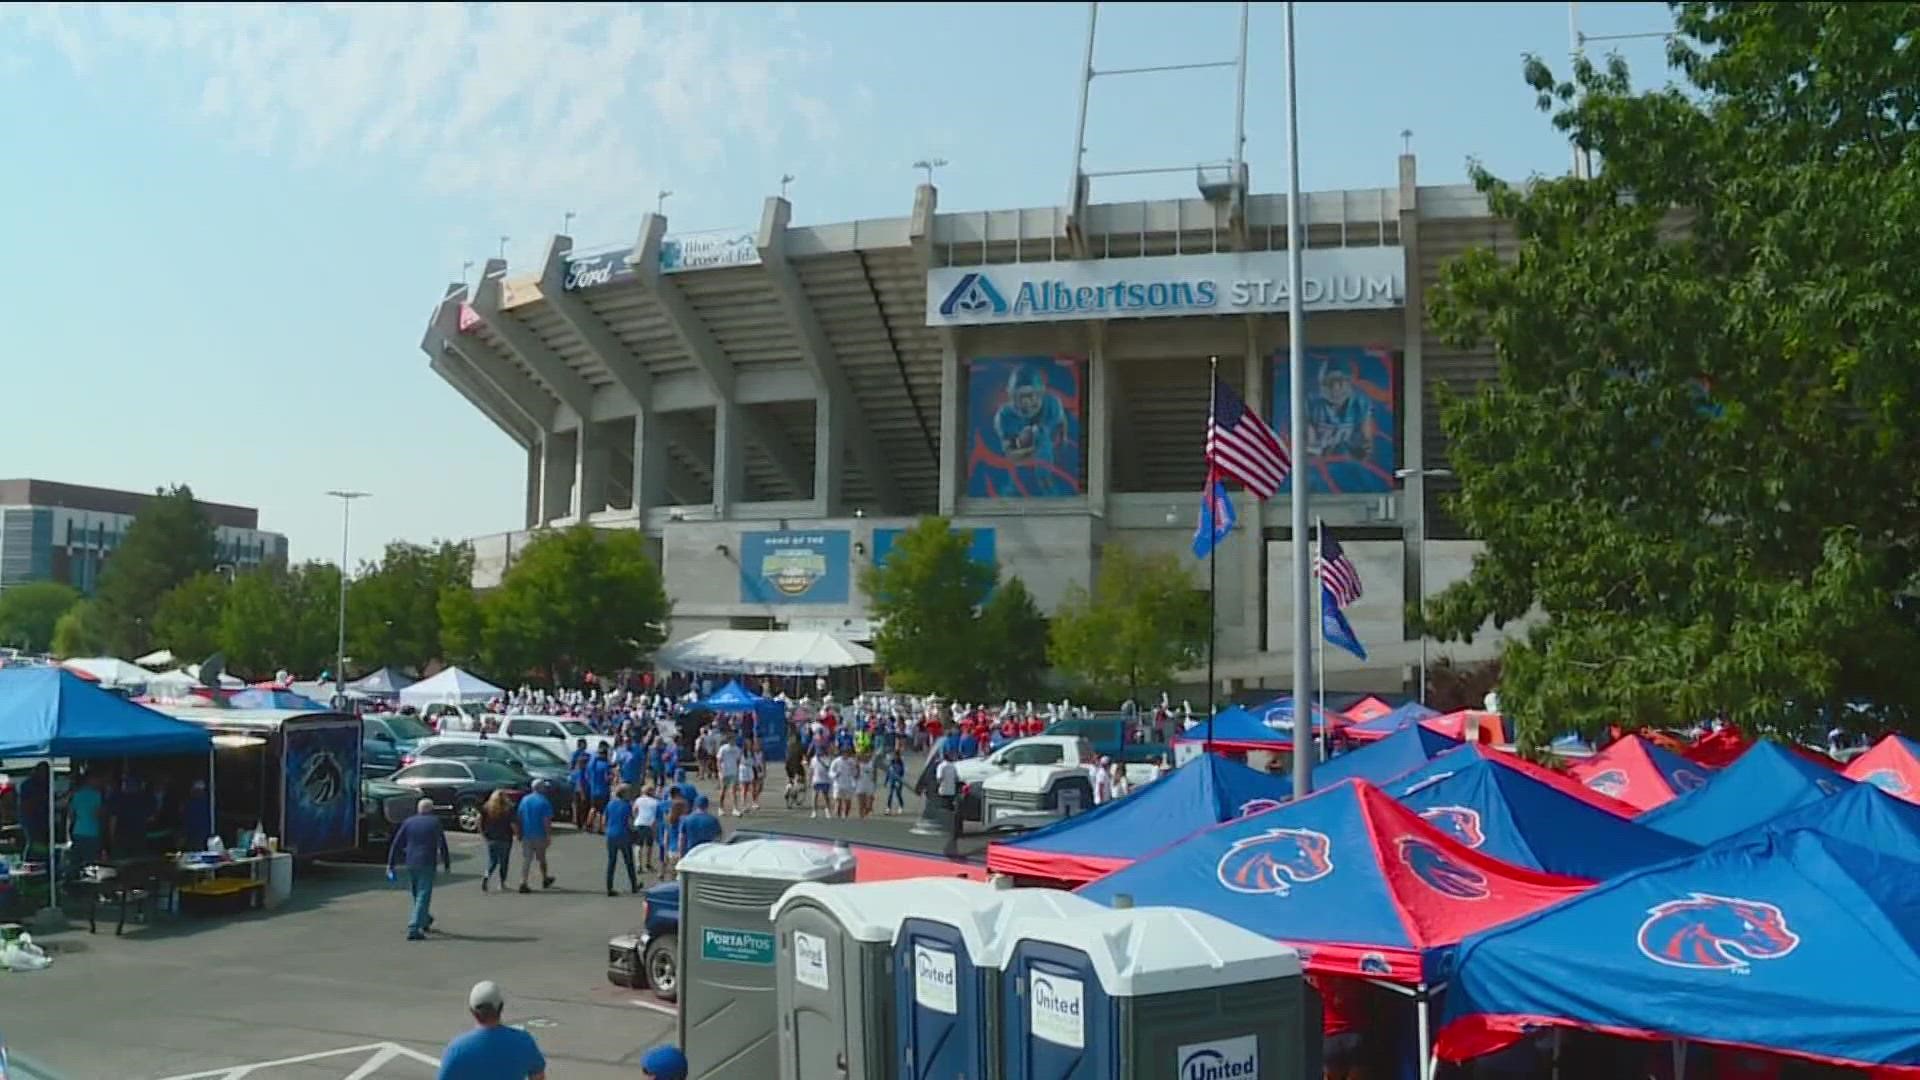 In Boise State football's first game at Albertsons Stadium against UT Martin, the concession crew was short of 200 workers and fans waited up to 45 minutes for food.